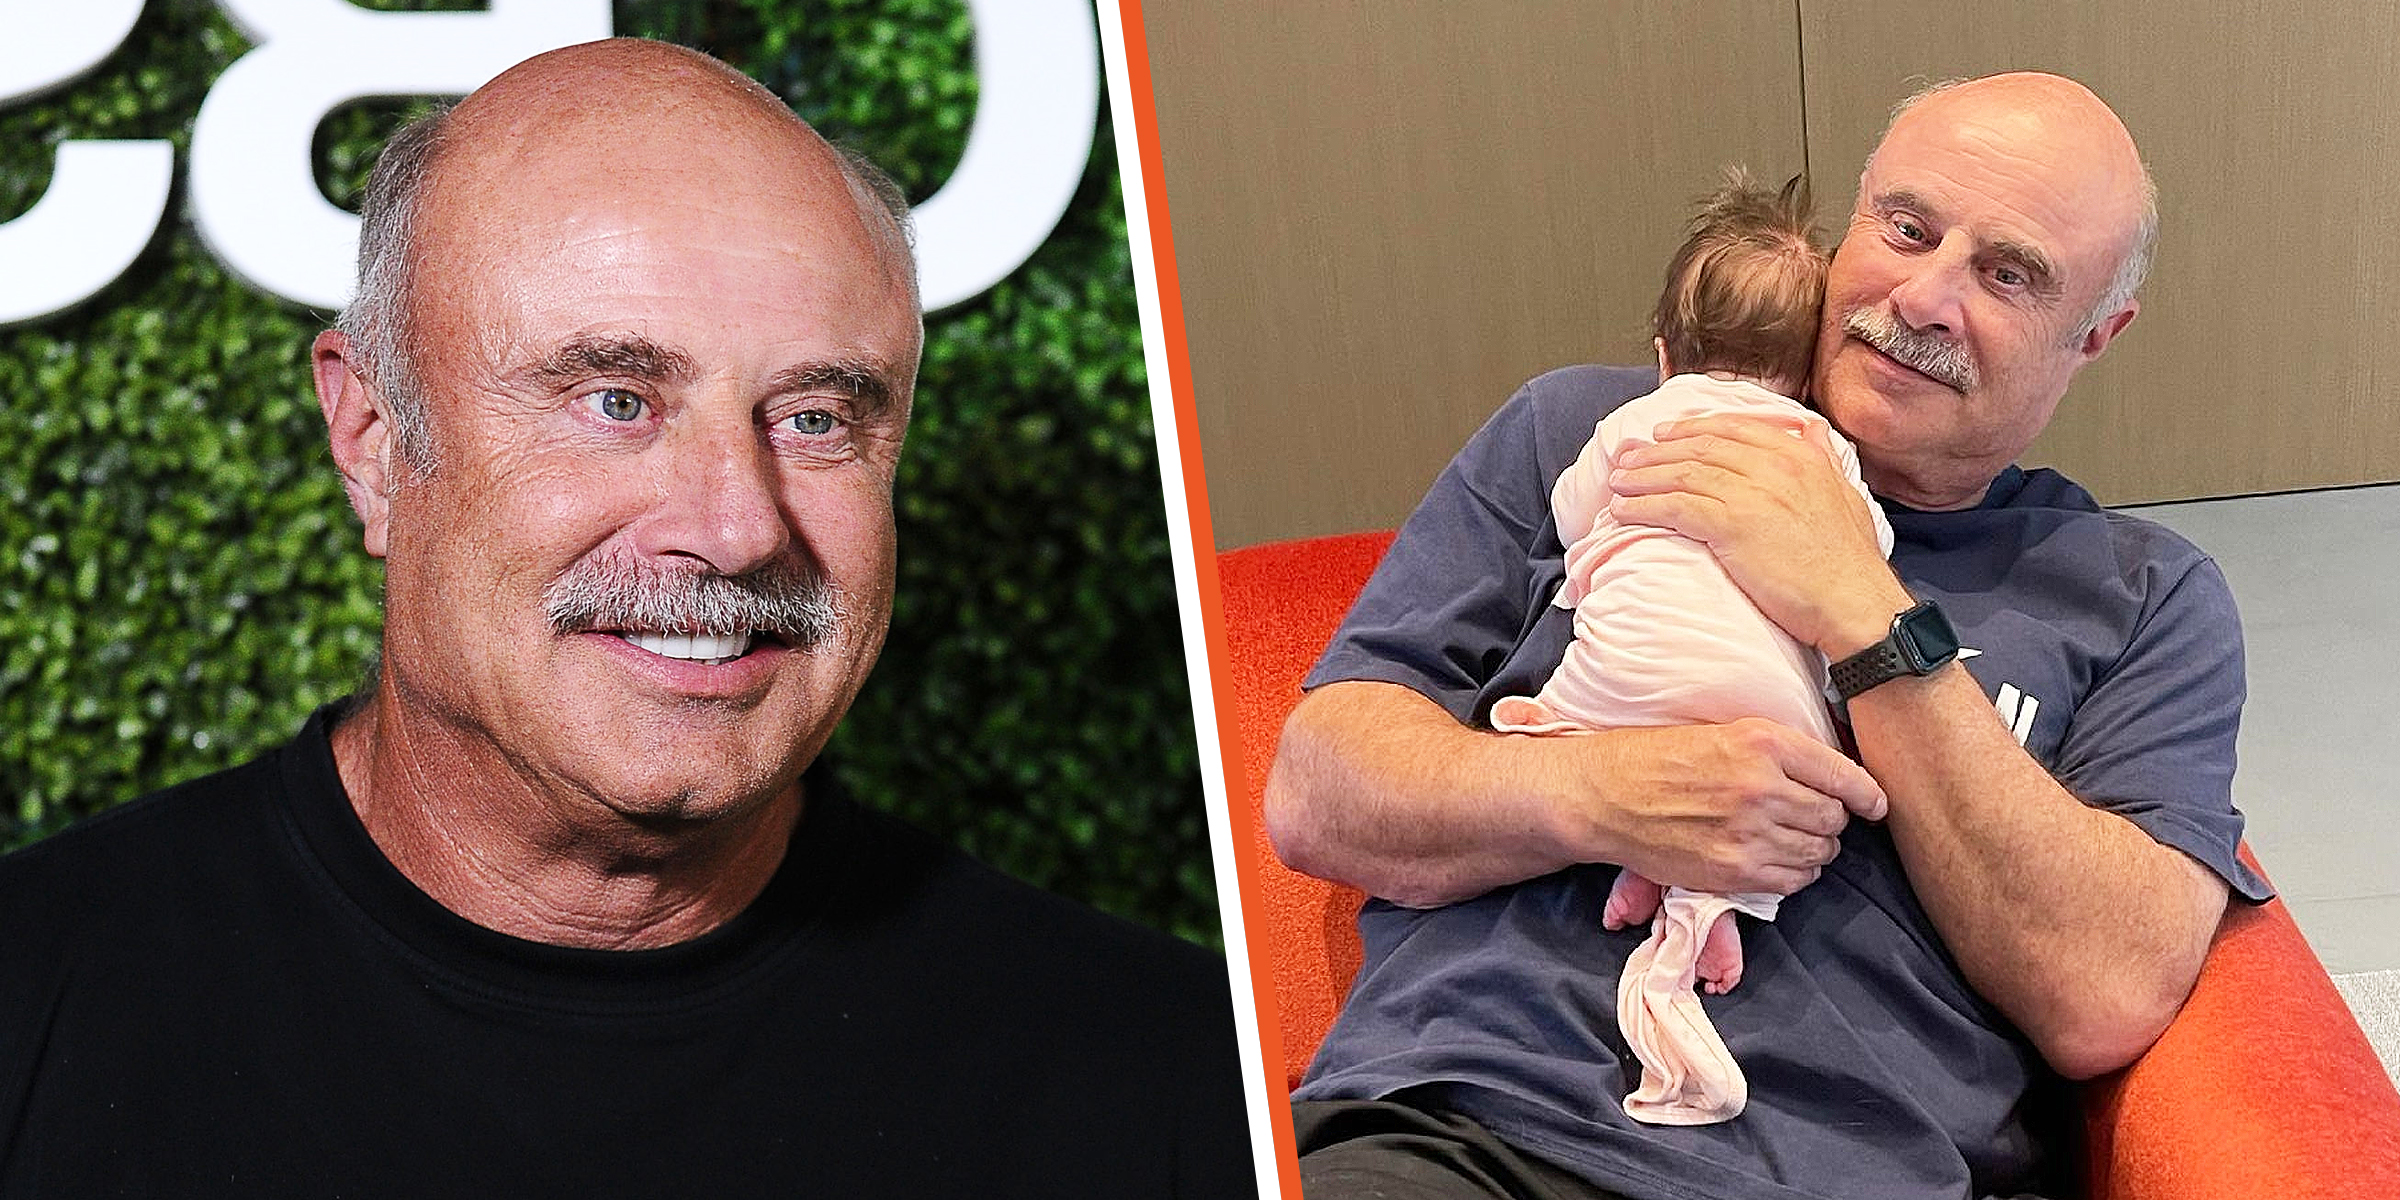 Dr. Phil McGraw | Dr. Phil with his granddaughter. | Source: Getty Images | Instagram.com/drphil